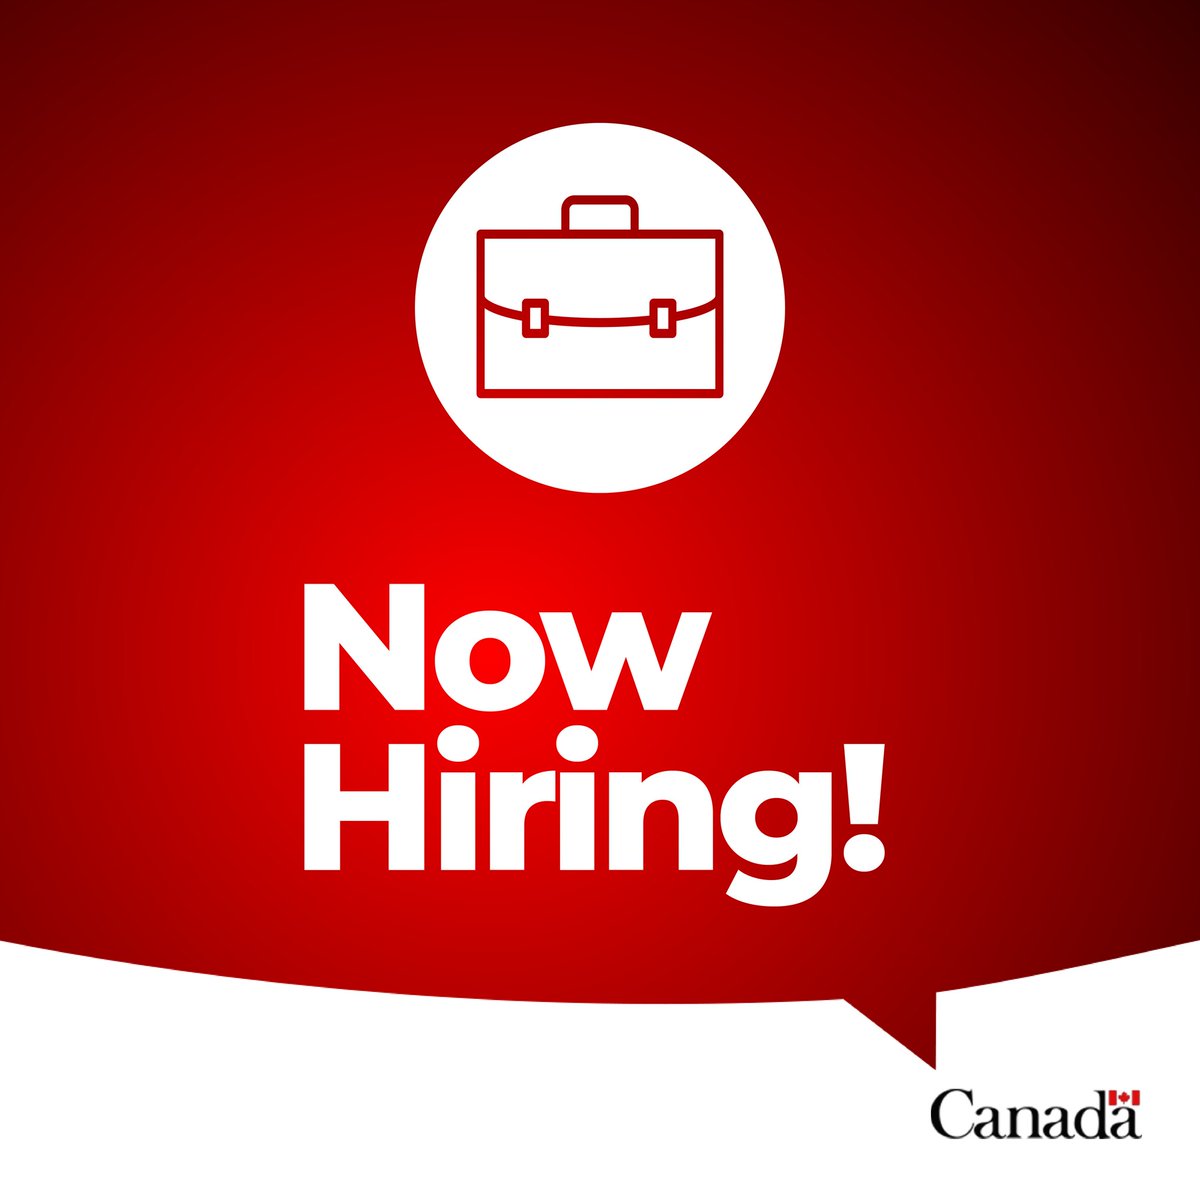 Our events team is hiring again! See complete details and deadline info here: staffing-les.international.gc.ca/en/careers/pro…